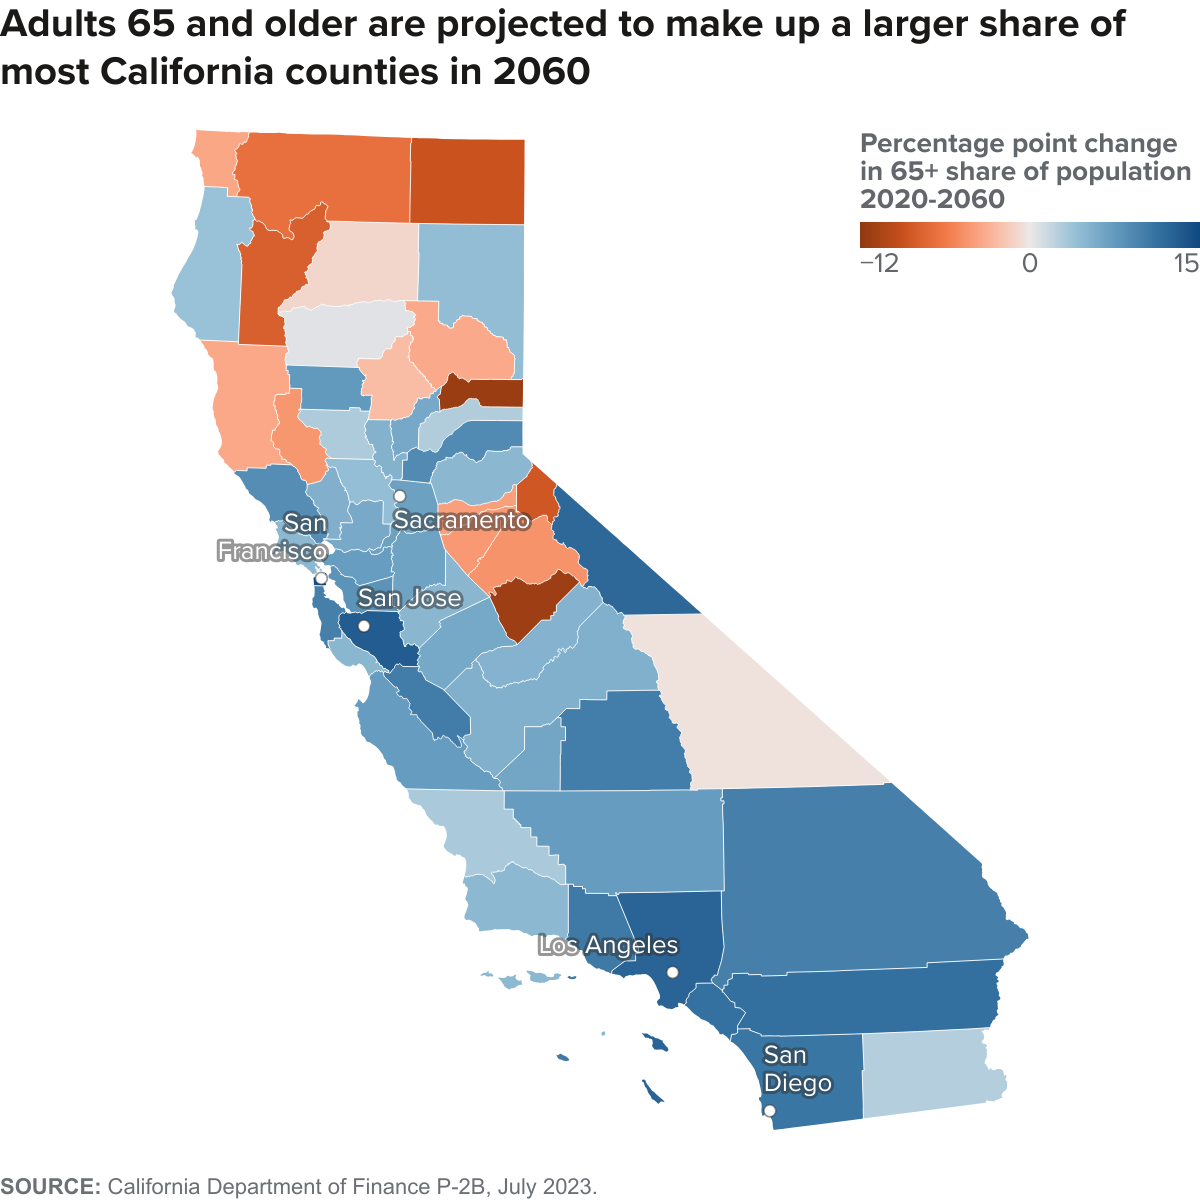 figure - Adults 65 and older are projected to make up a larger share of most California counties in 2060